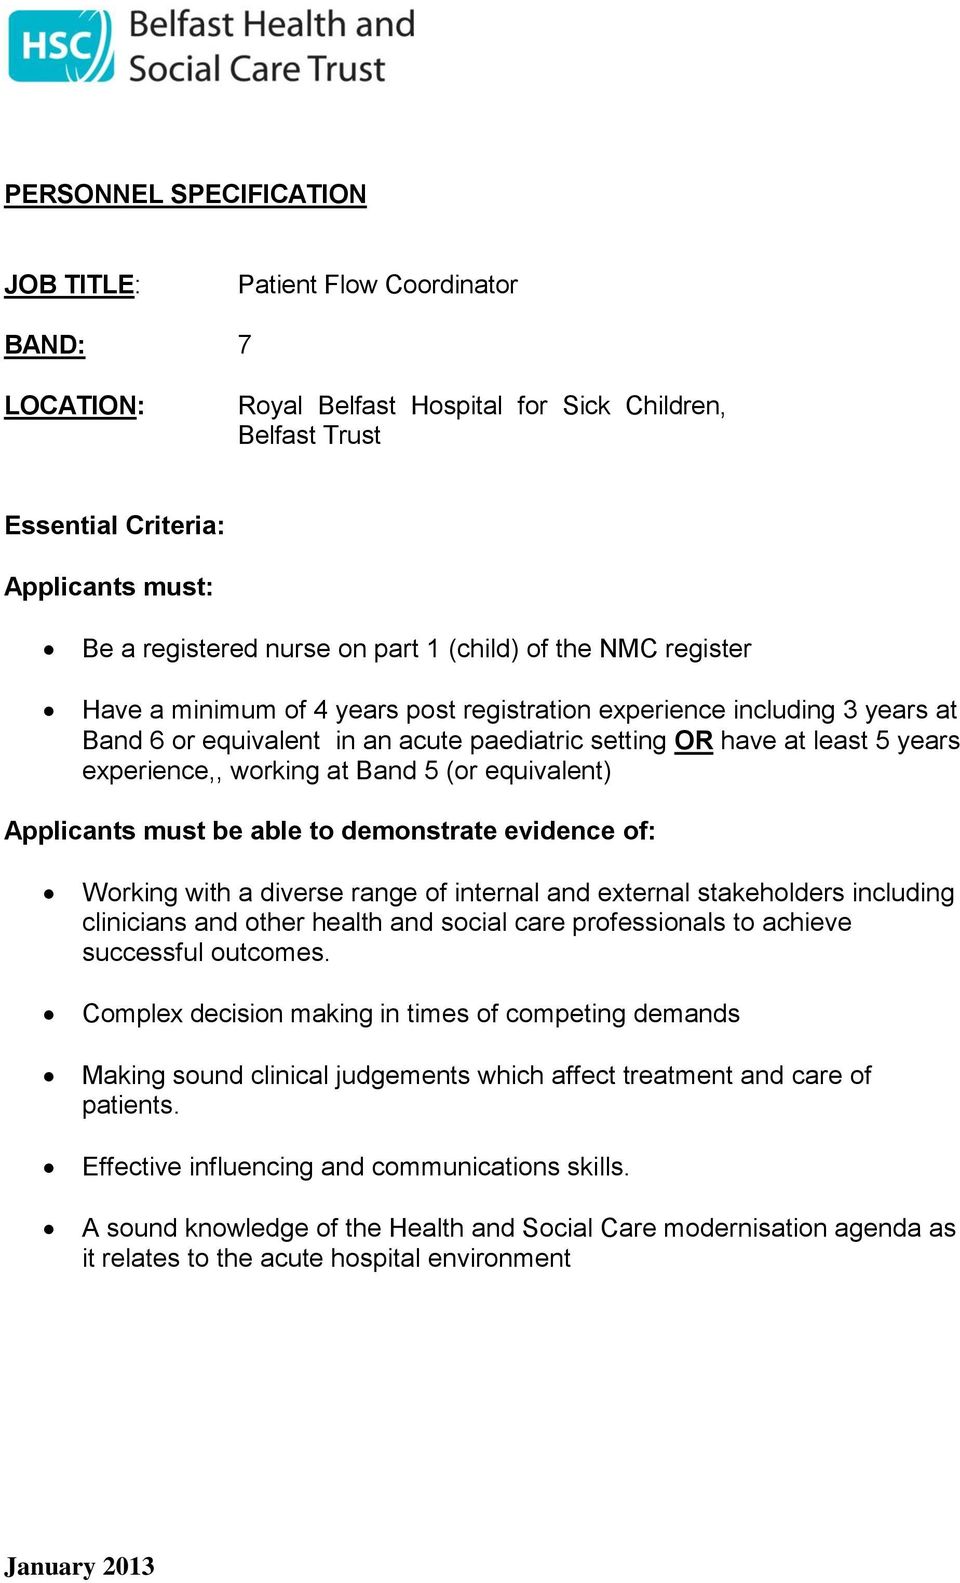 experience,, working at Band 5 (or equivalent) Applicants must be able to demonstrate evidence of: Working with a diverse range of internal and external stakeholders including clinicians and other